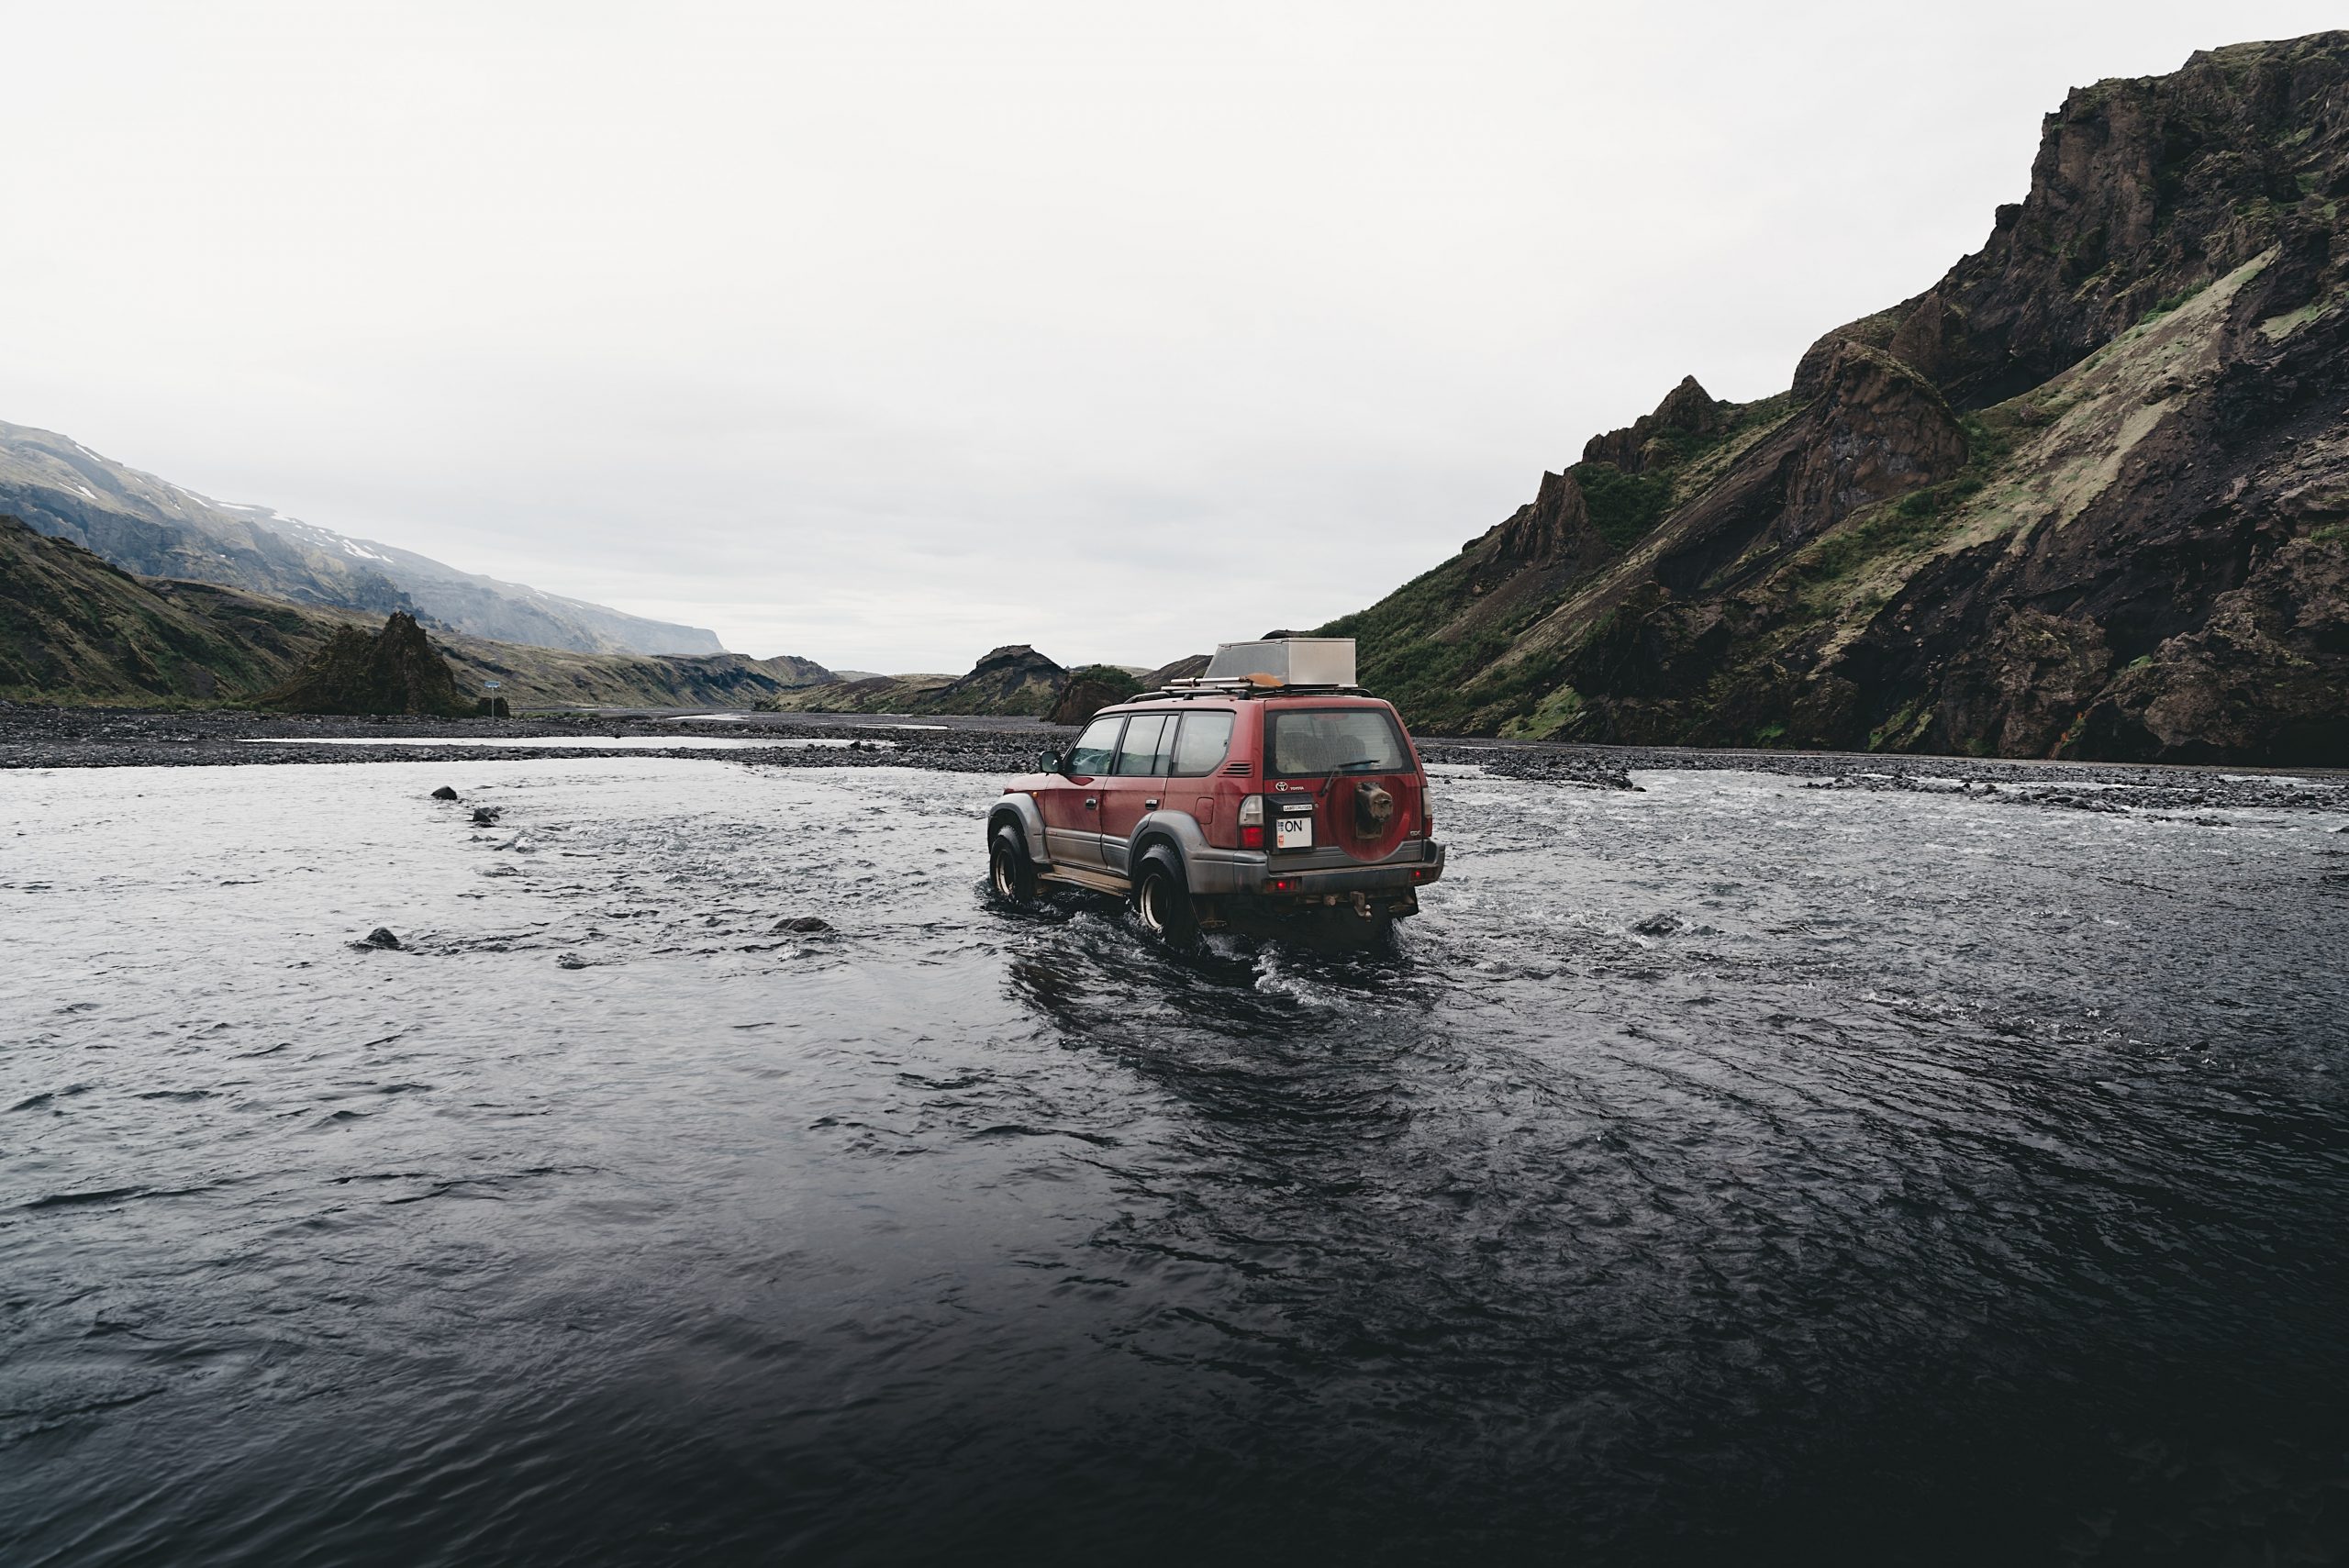 A red car crossing a river in the Icelandic Highlands.